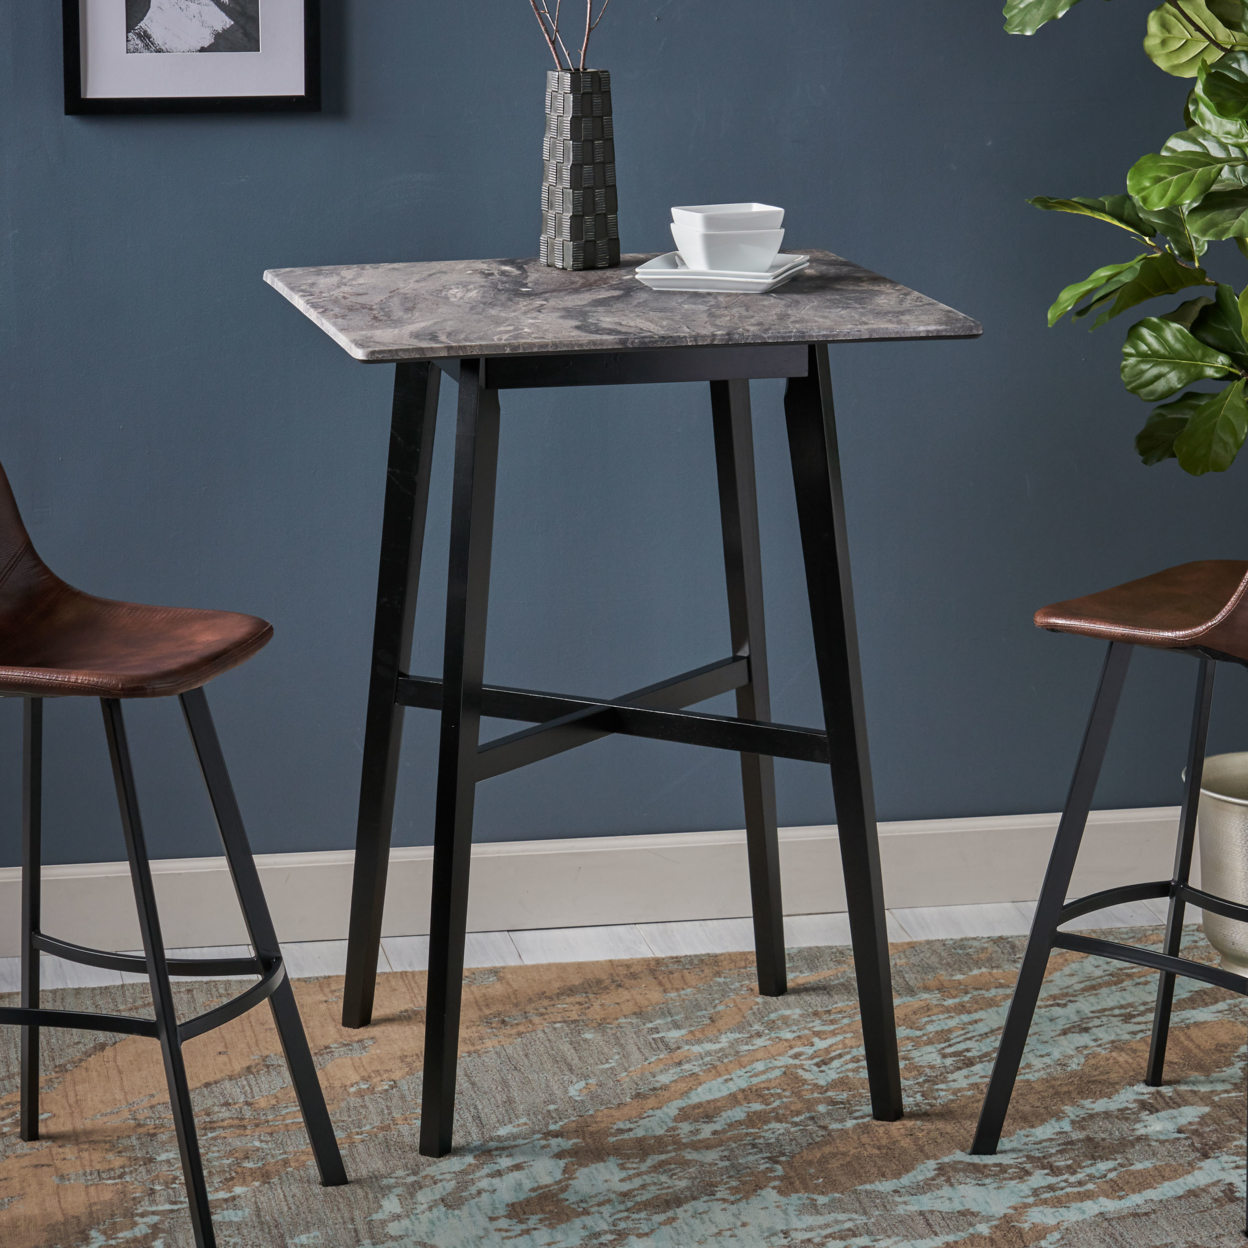 Lily Modern Bar Table With Rubberwood Legs And Laminate Table Top - Paladina Finish + Black